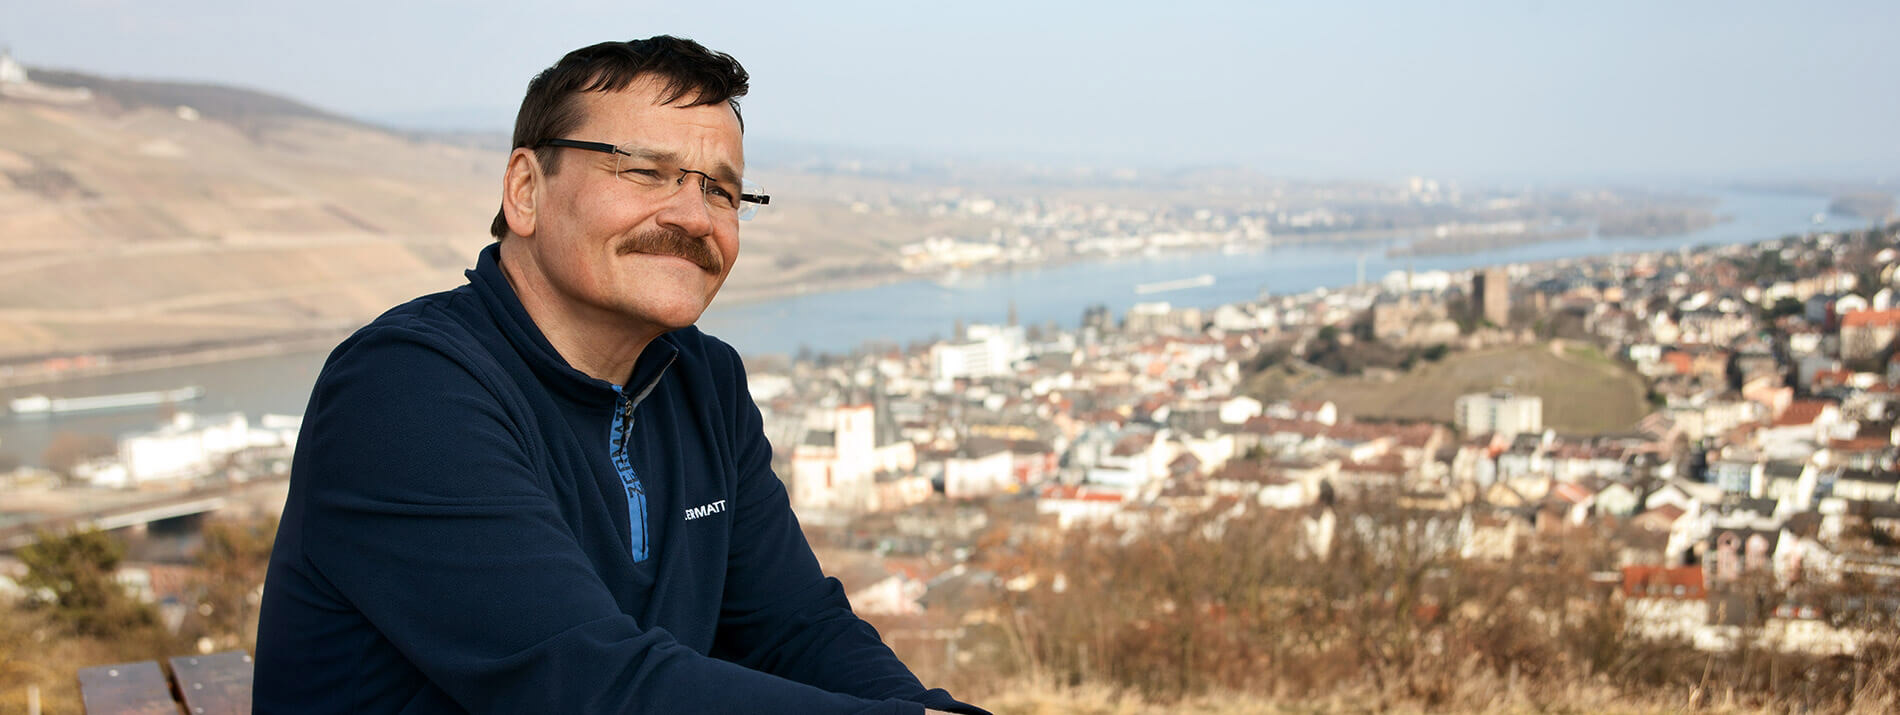 Man sitting on a hilltop with a city and river in the background.